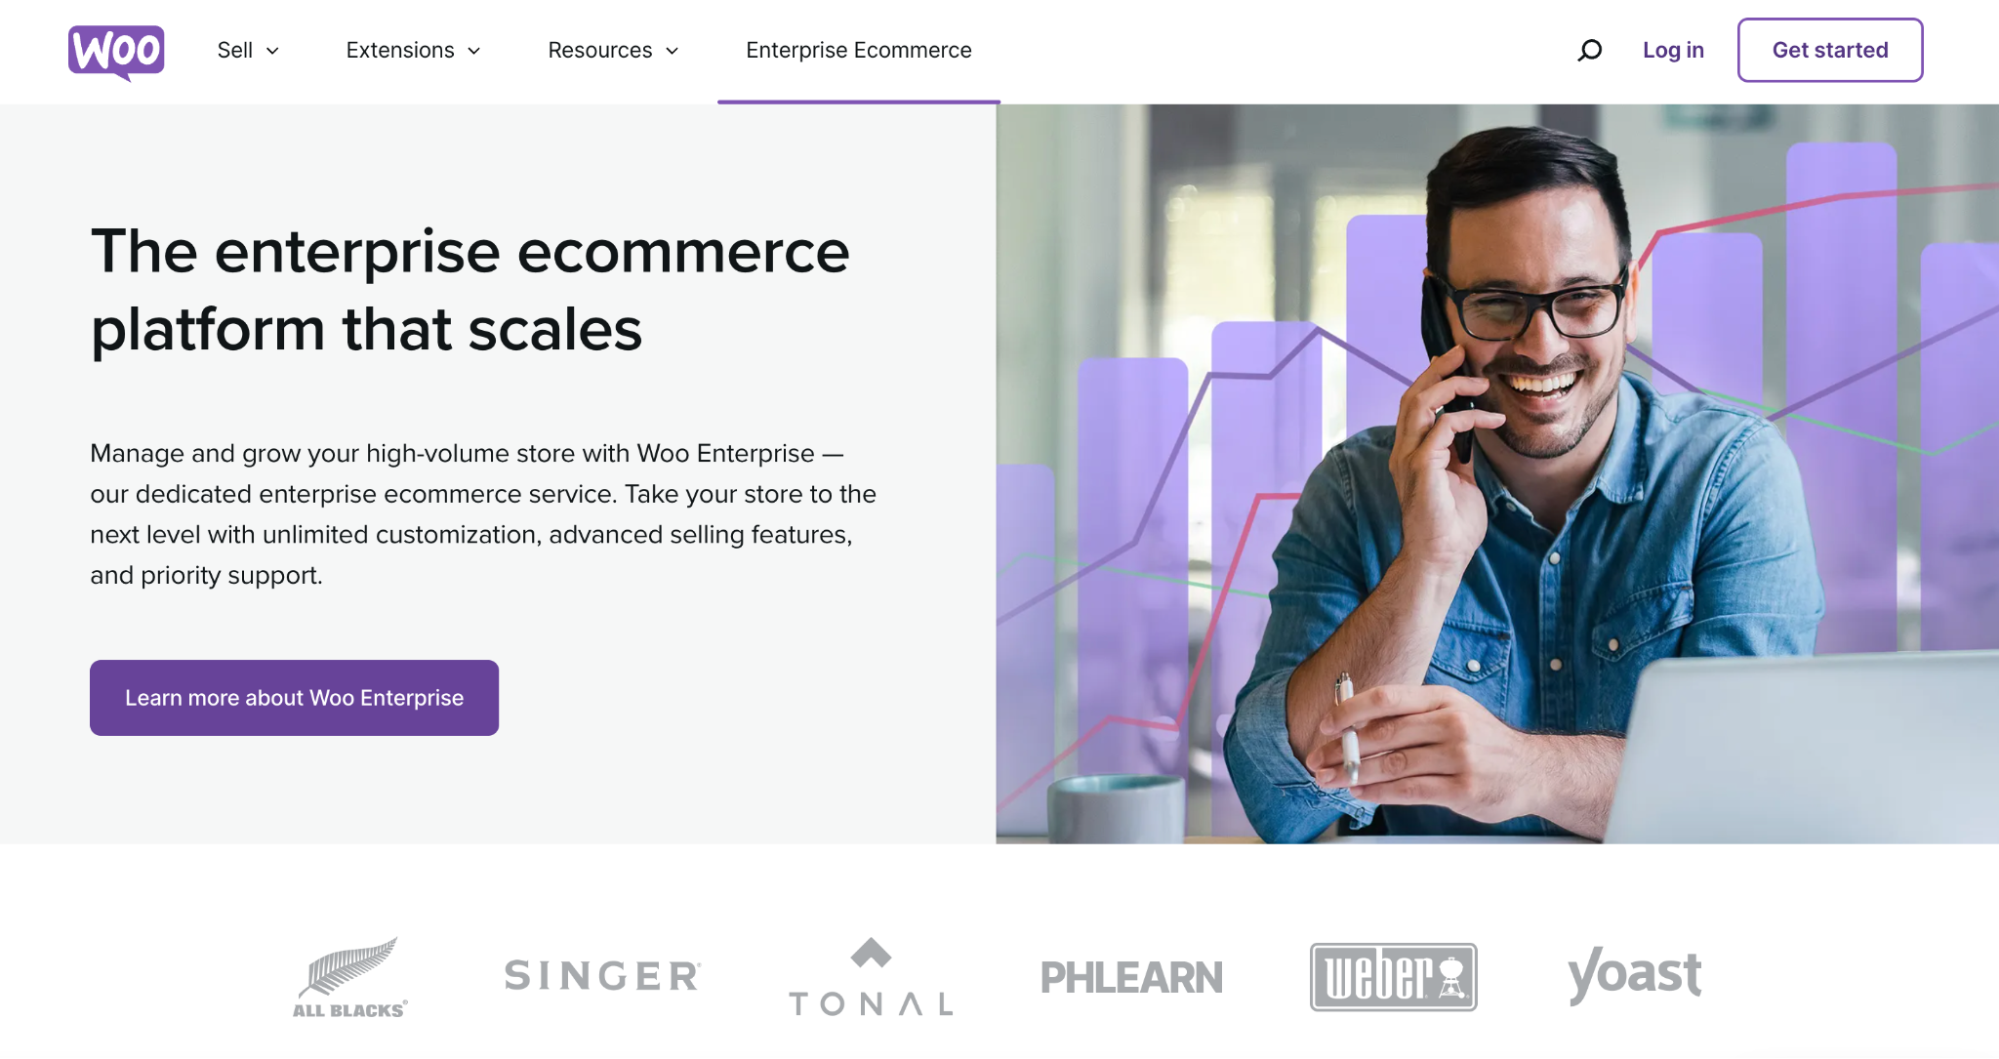 WooCommerce screengrab showing a man on the phone on a purple background.